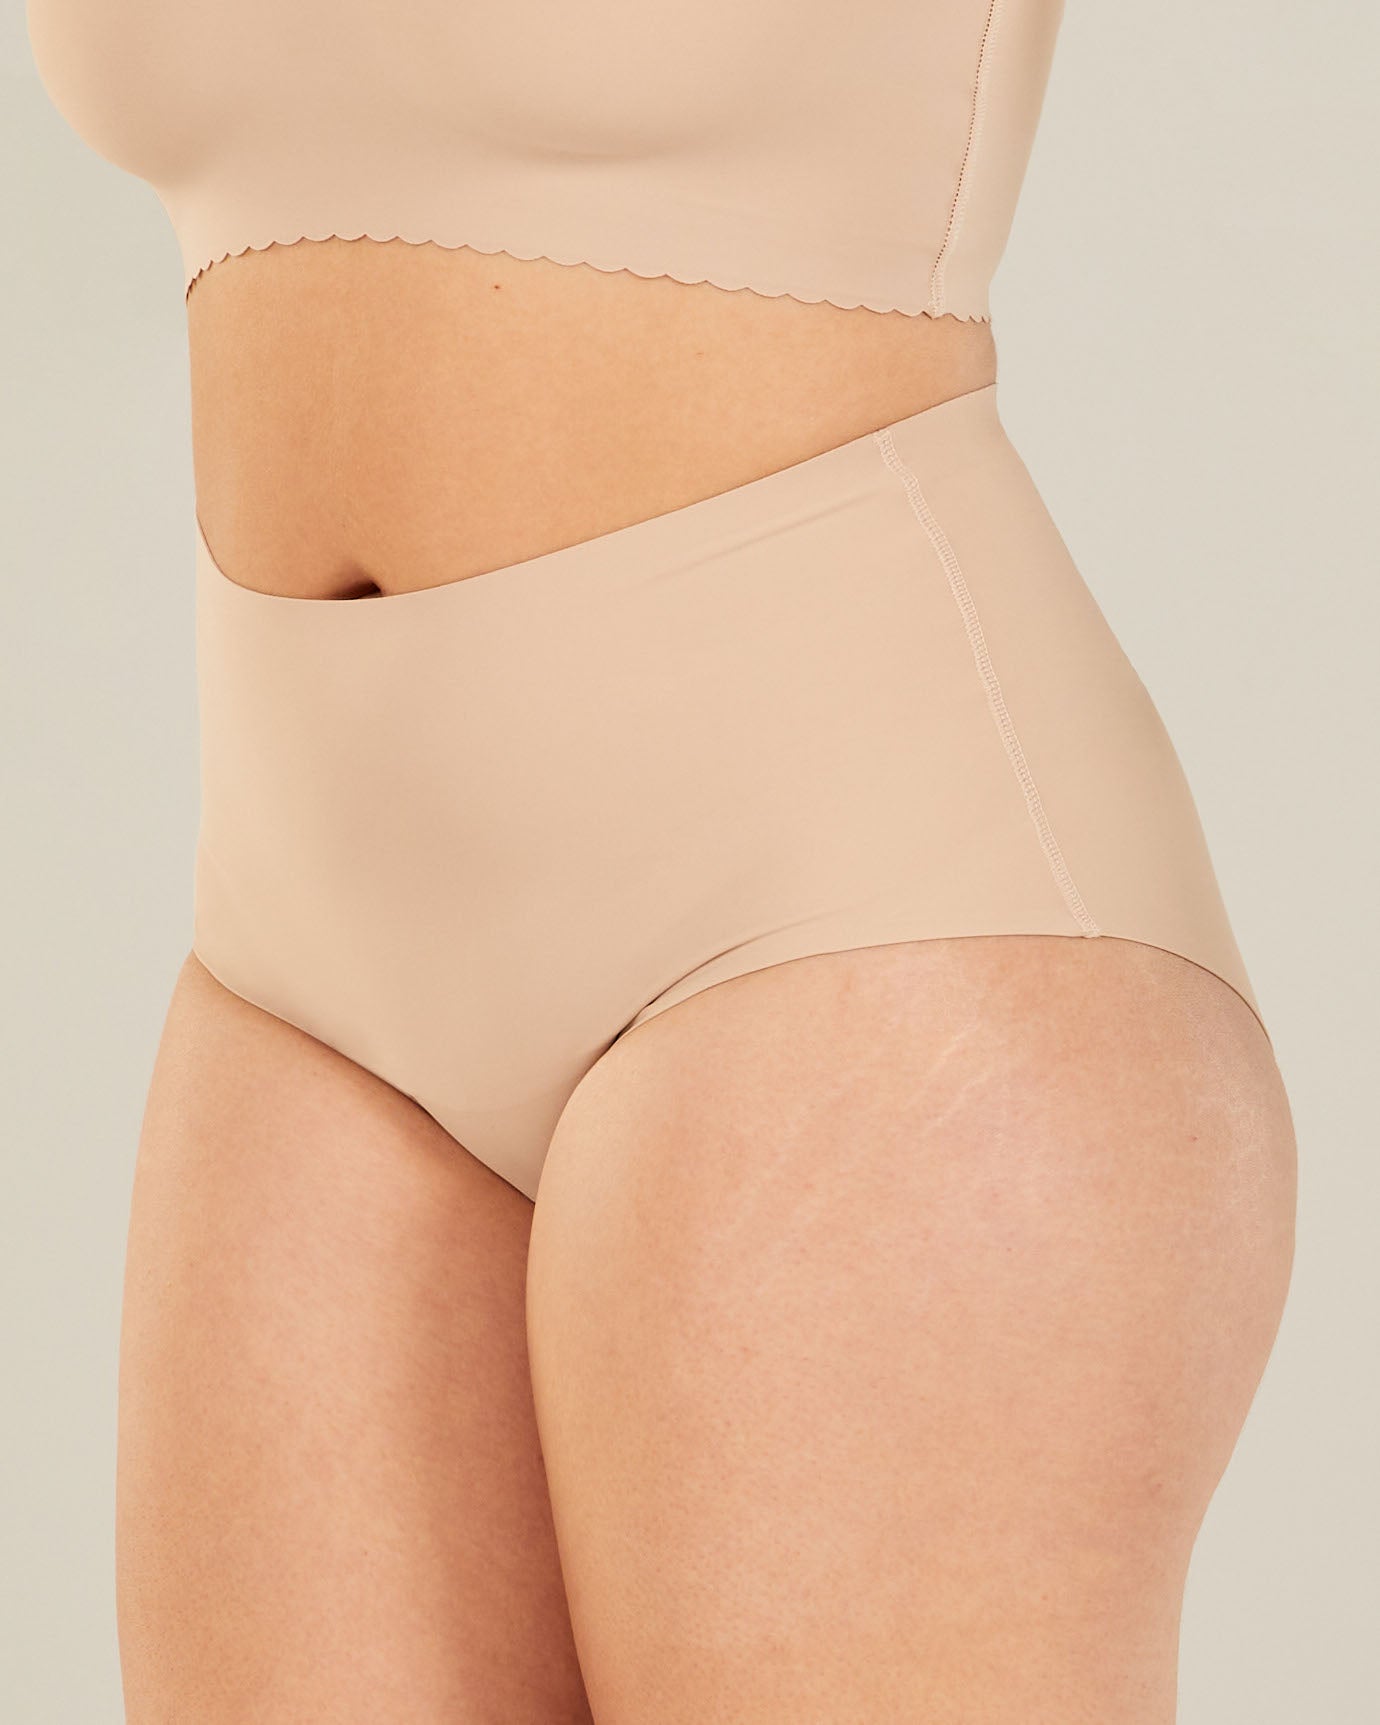 M&S shoppers rave about £8 high rise knickers that are amazing to sleep in